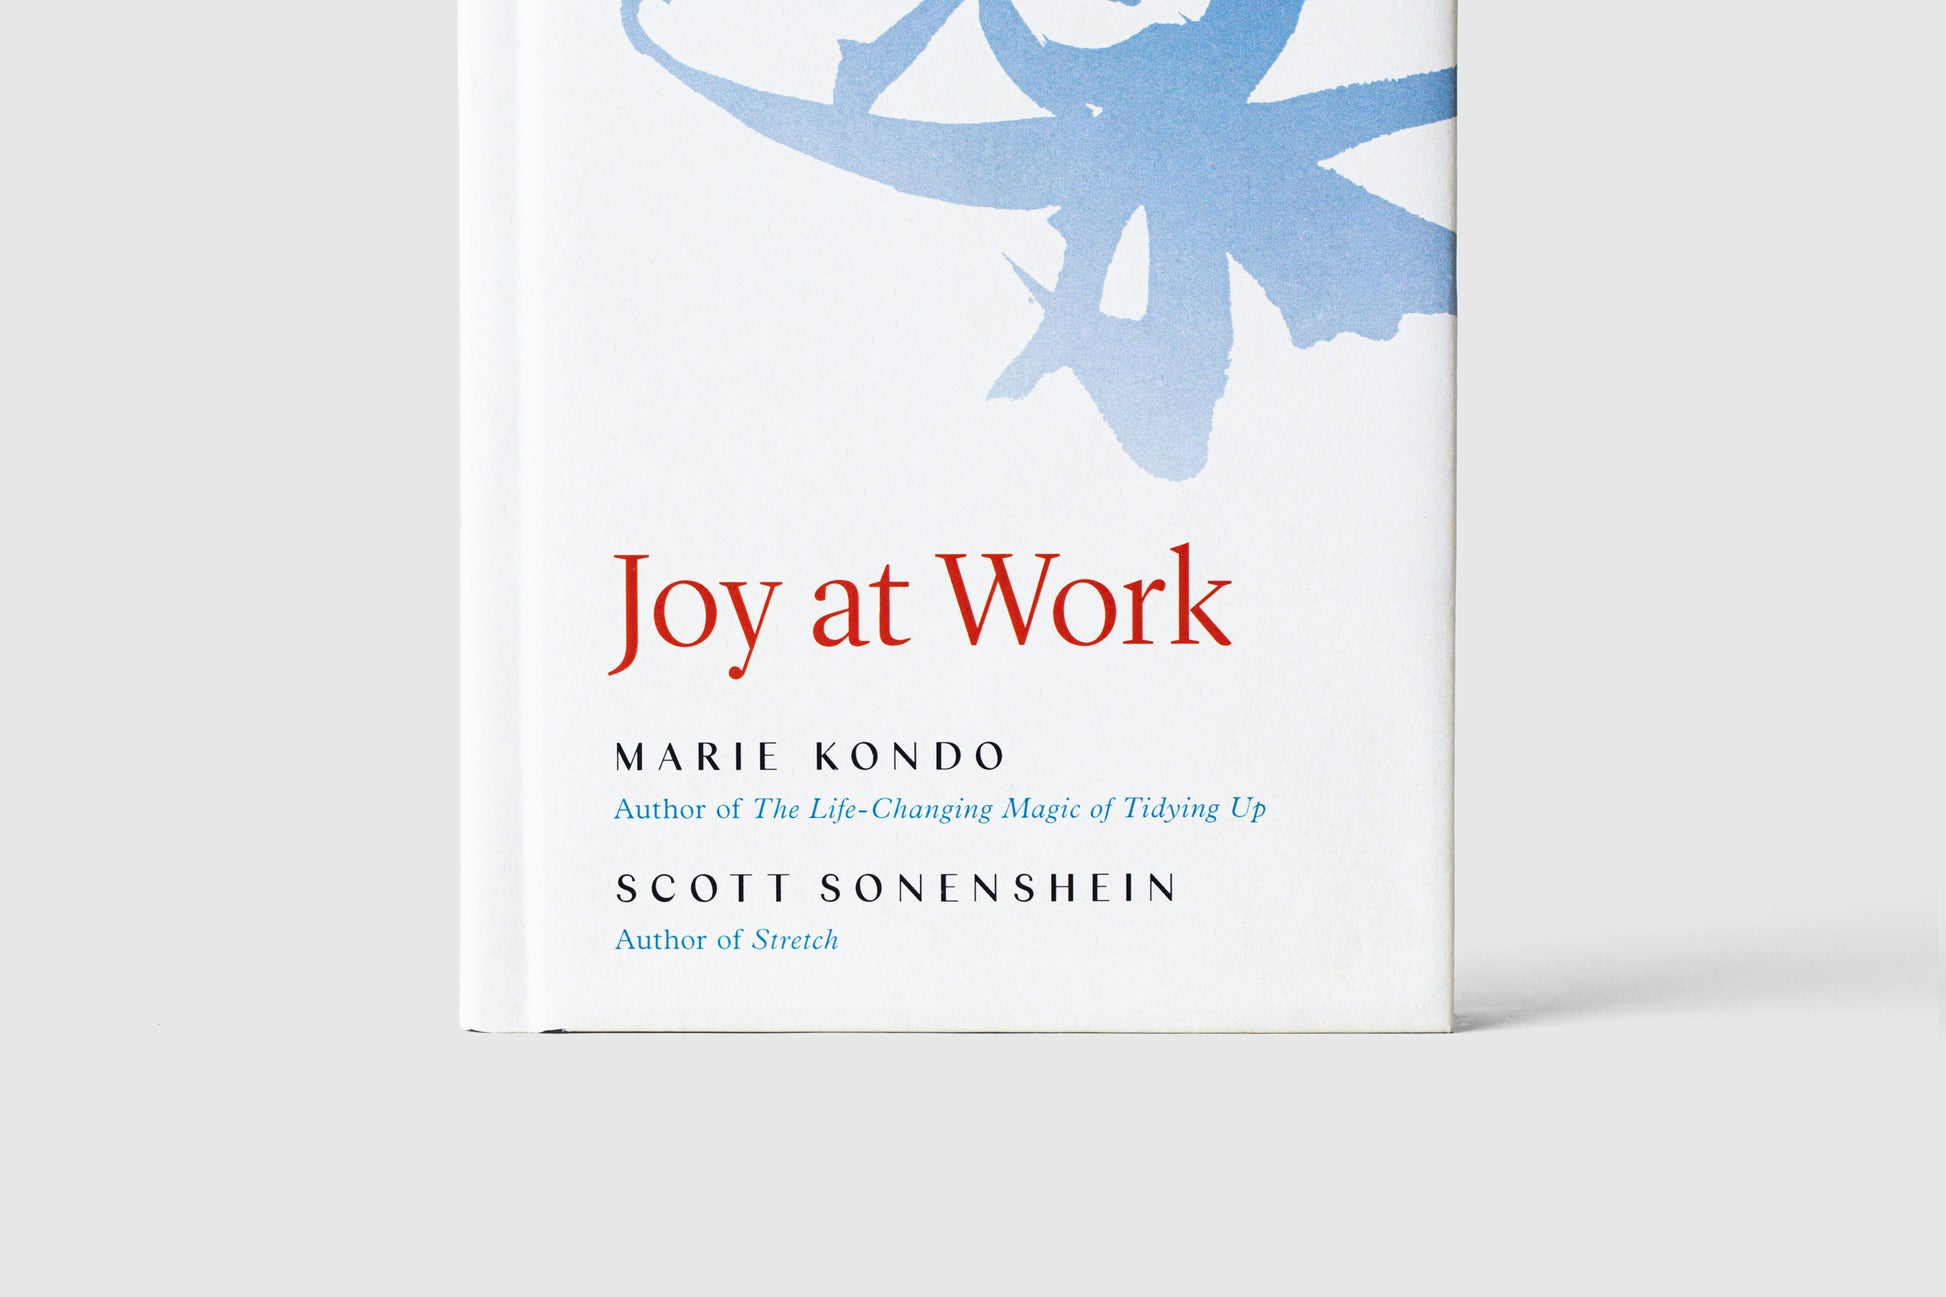 Review: Marie Kondo sparks joy at work in new book